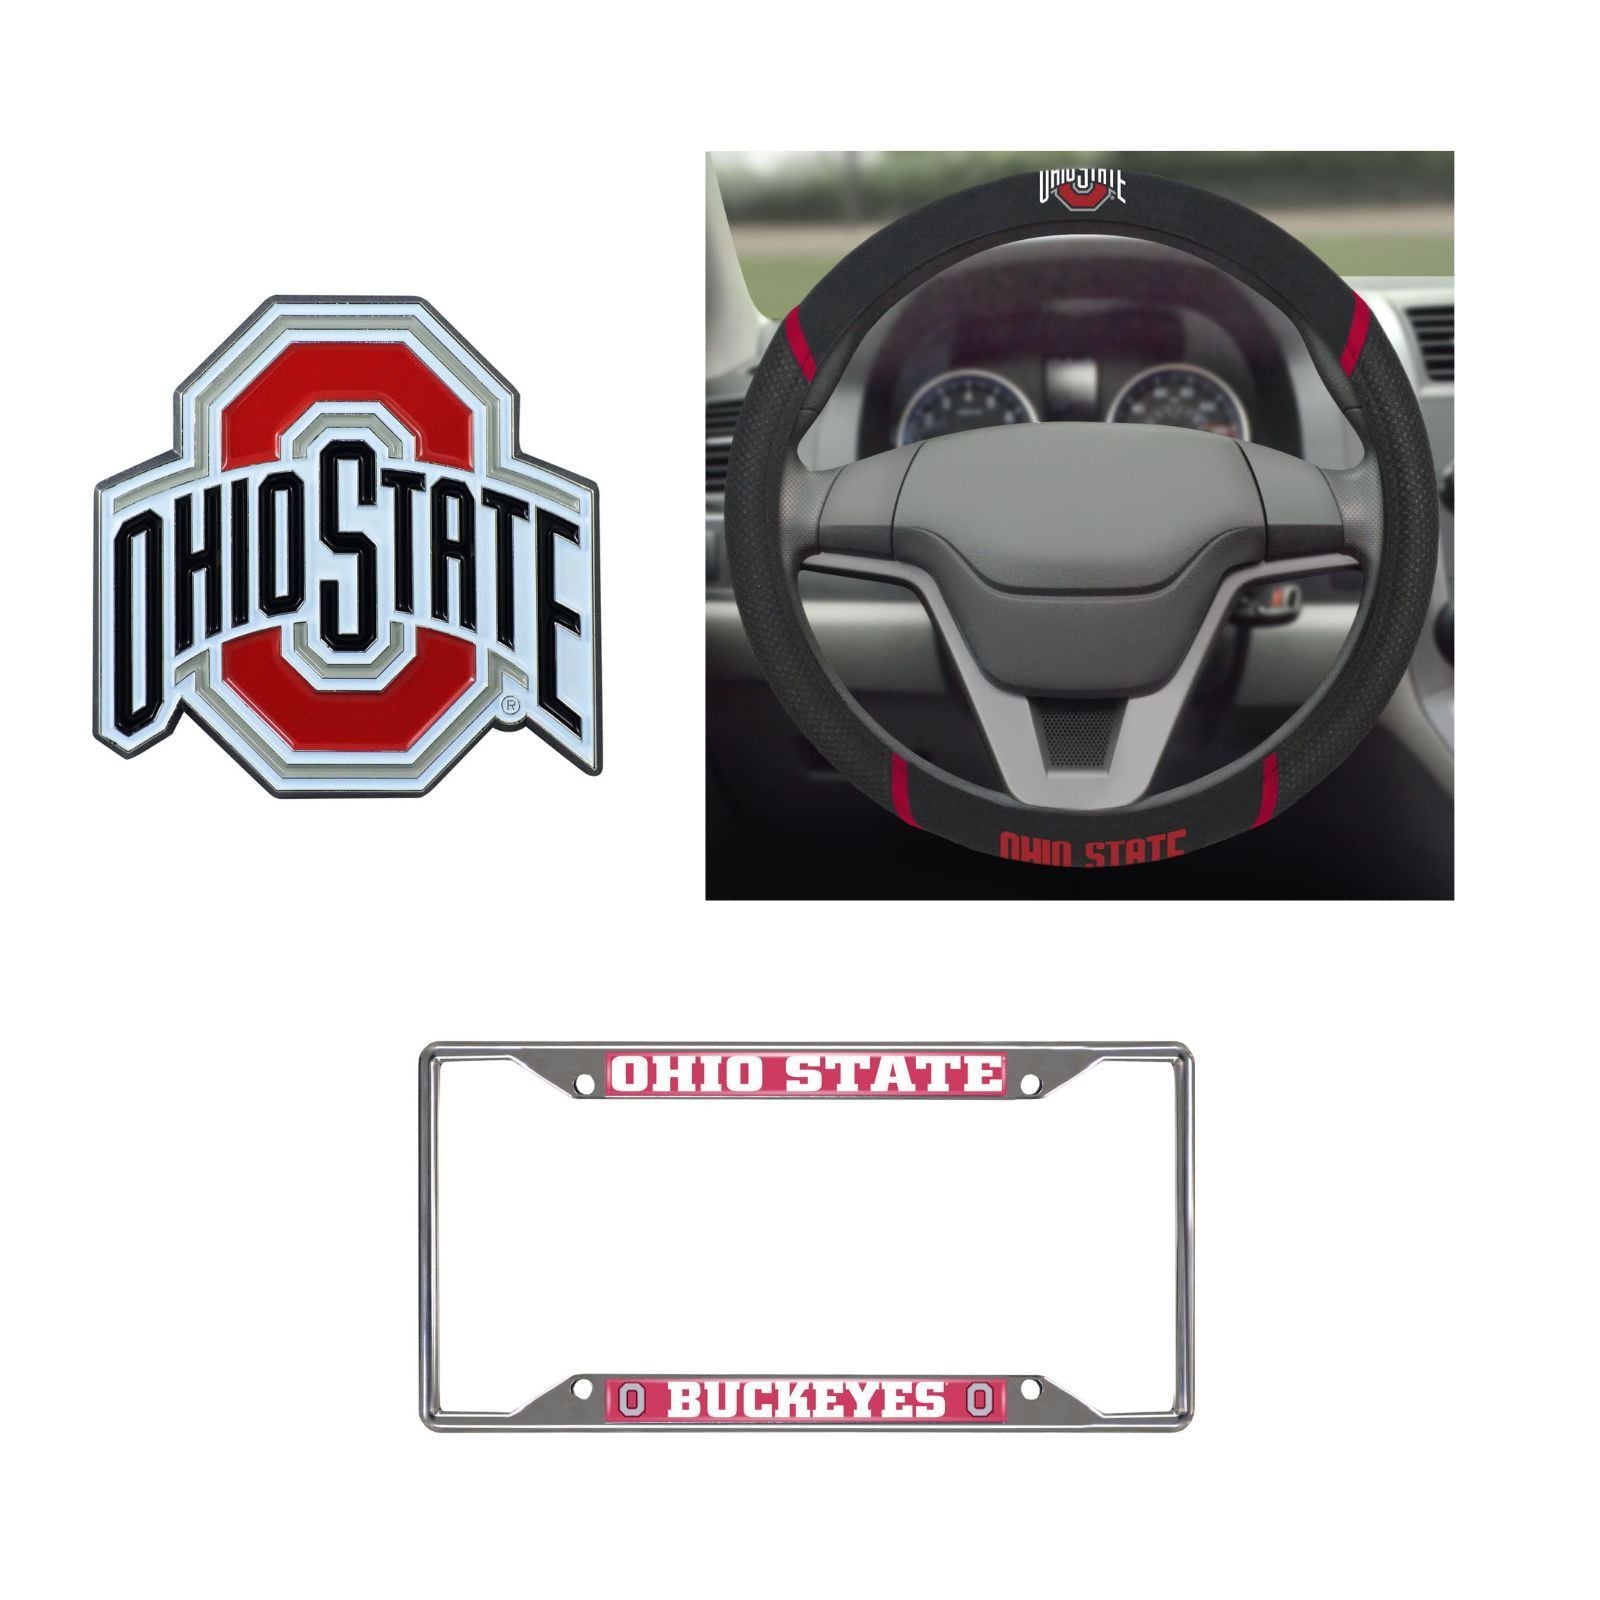 Ohio State Buckeyes Steering Wheel Cover, License Plate Frame, 3D Color Emblem